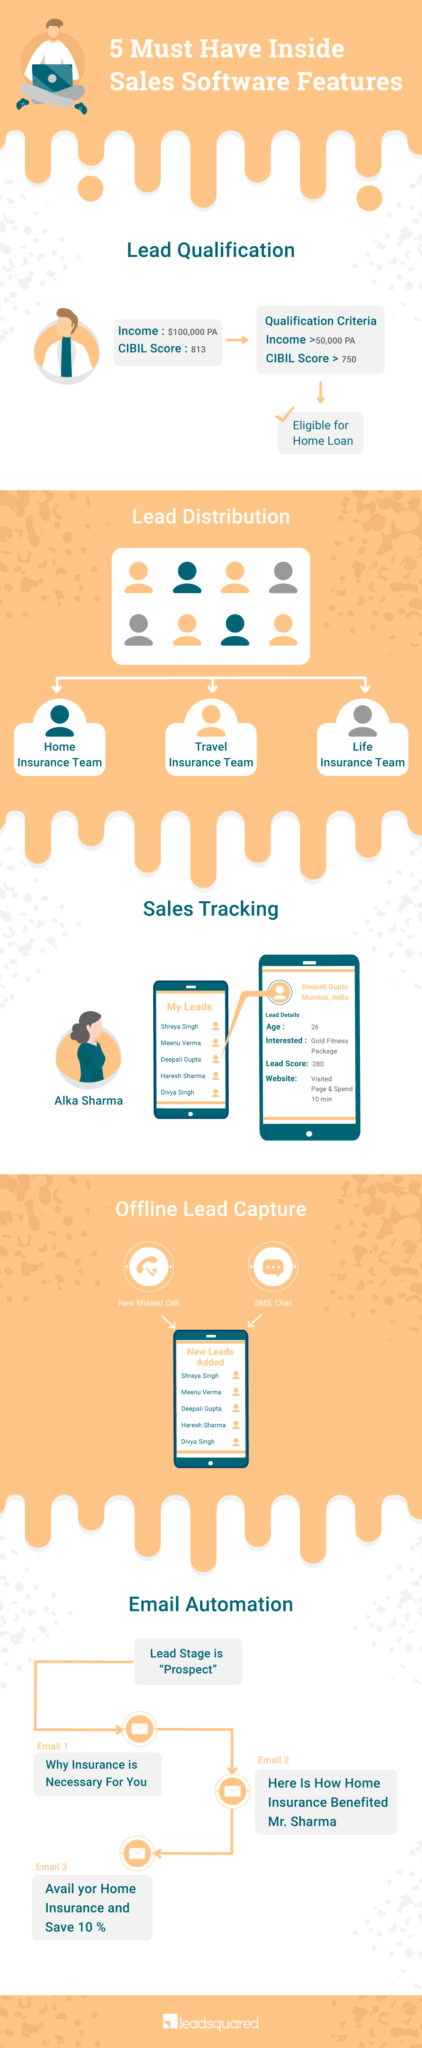 inside sales software - infographic